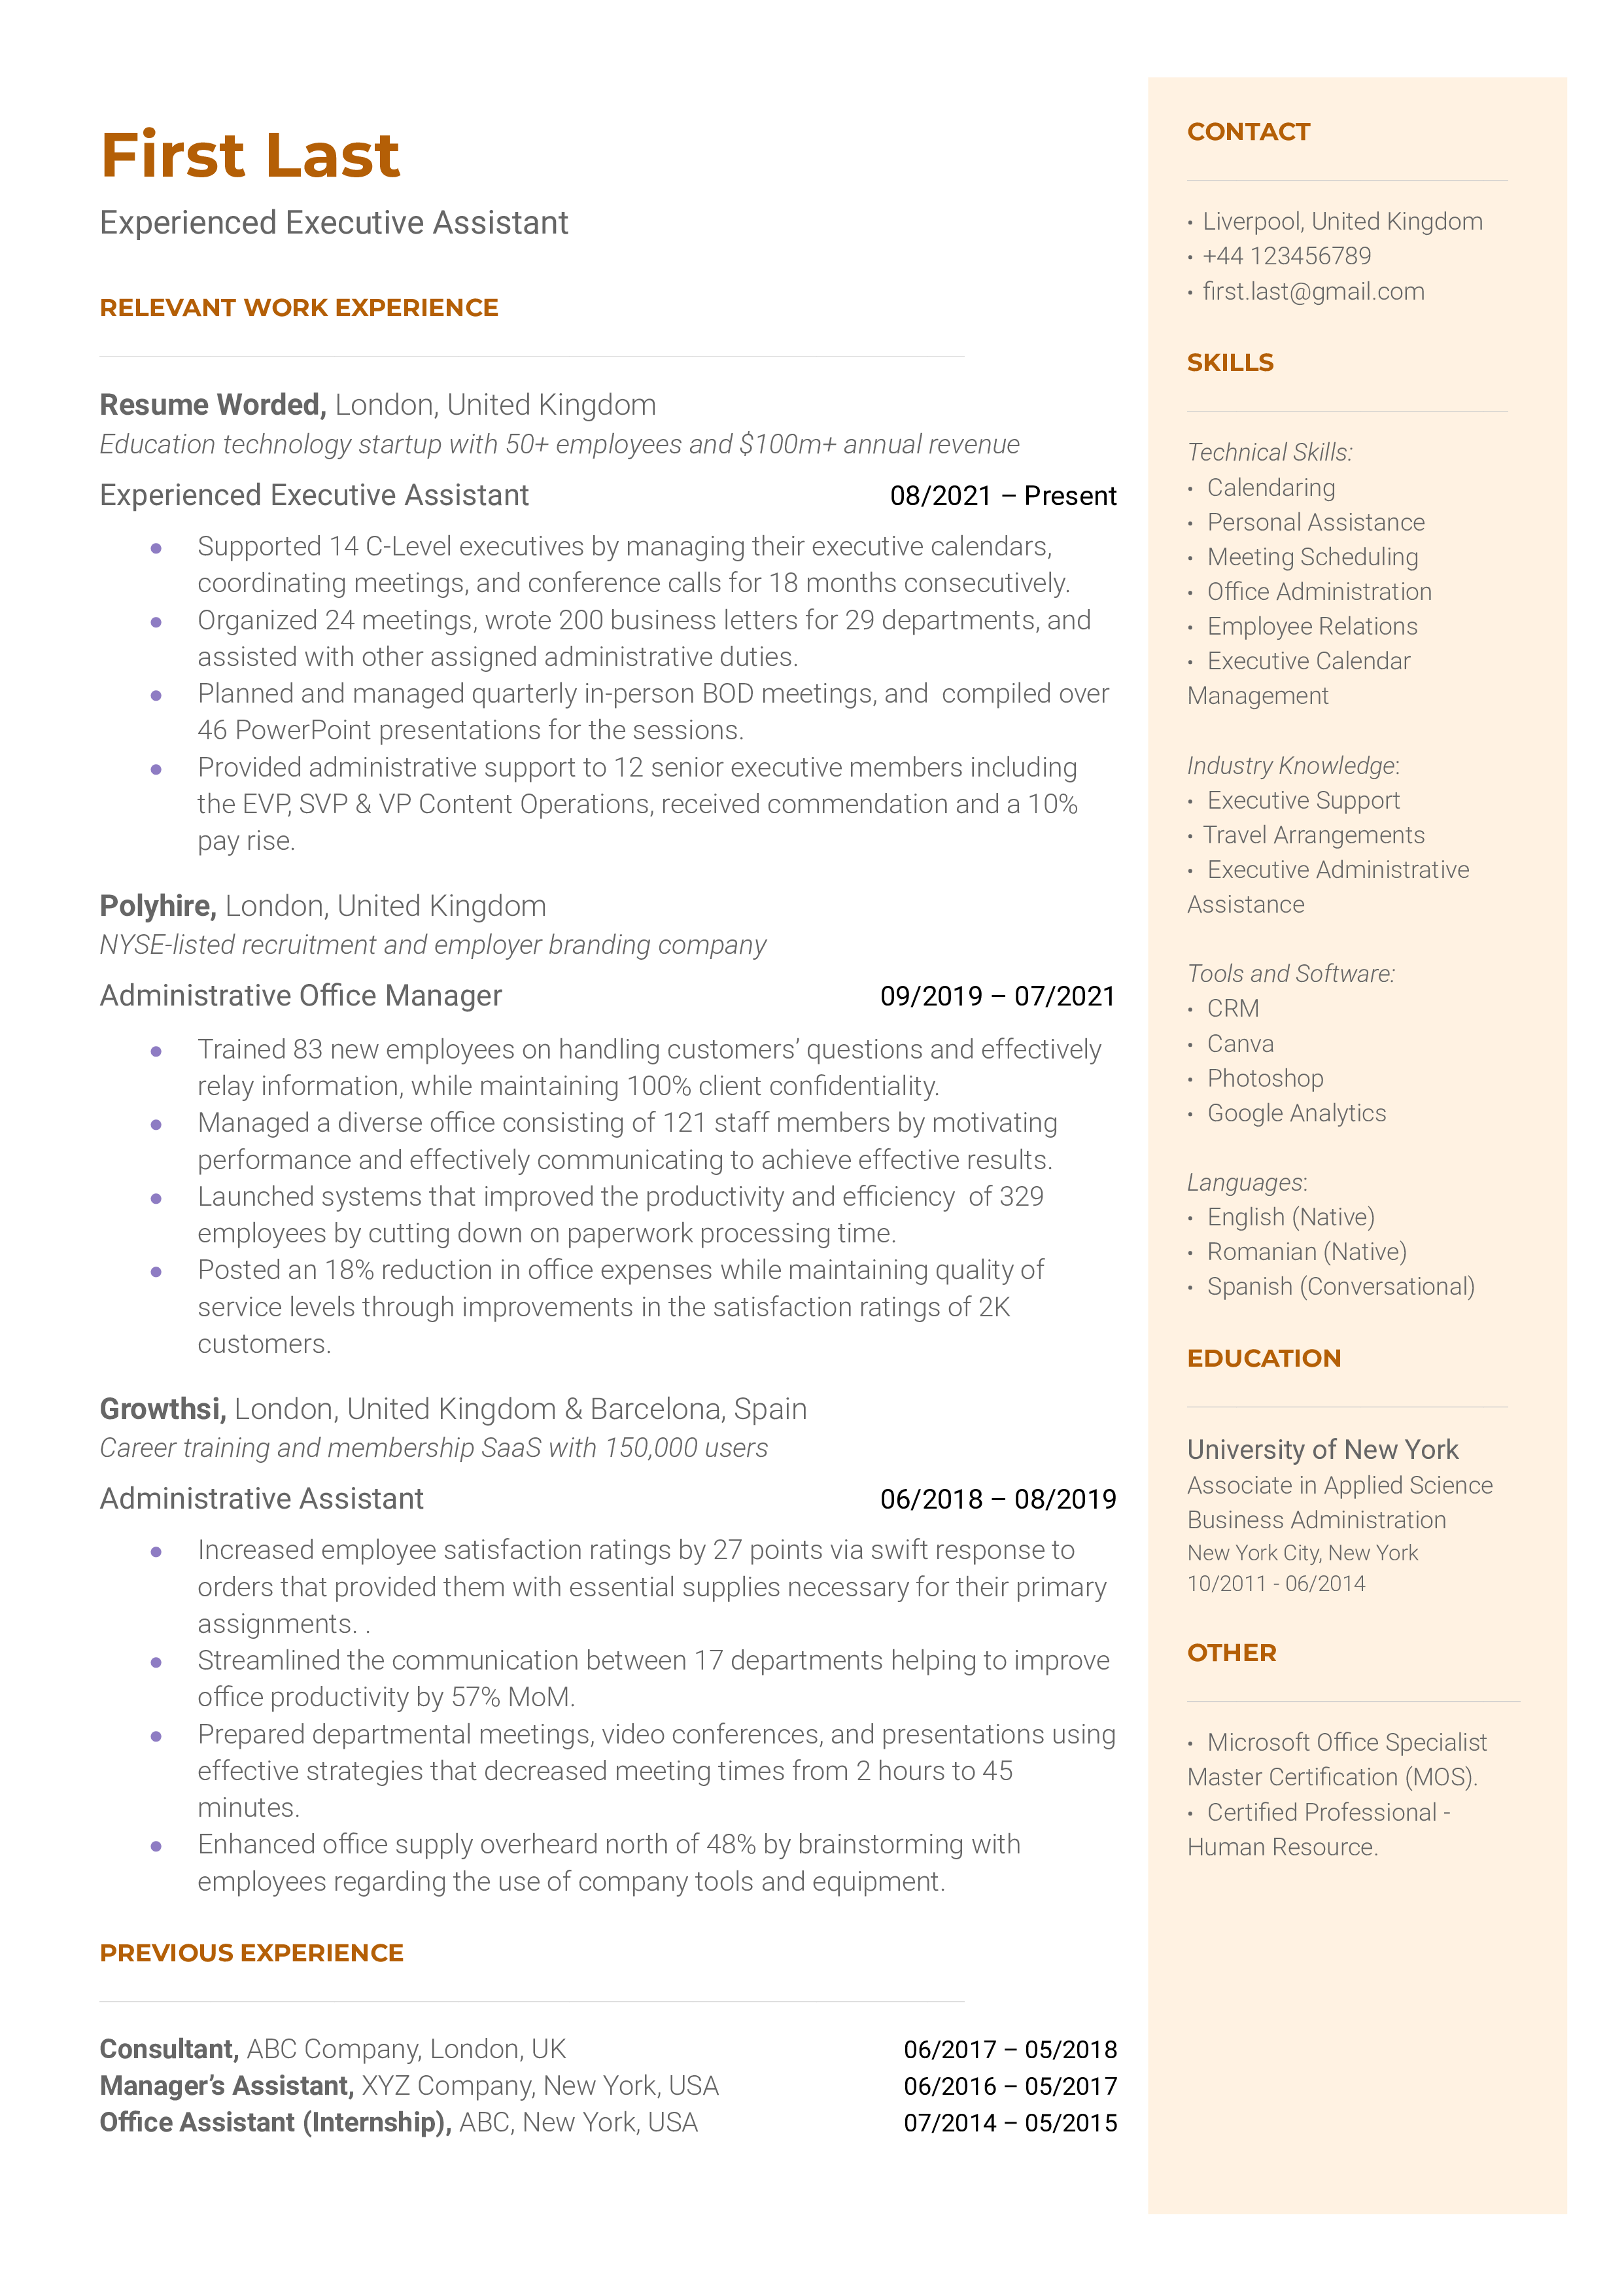 Experienced Executive Assistant Resume Sample